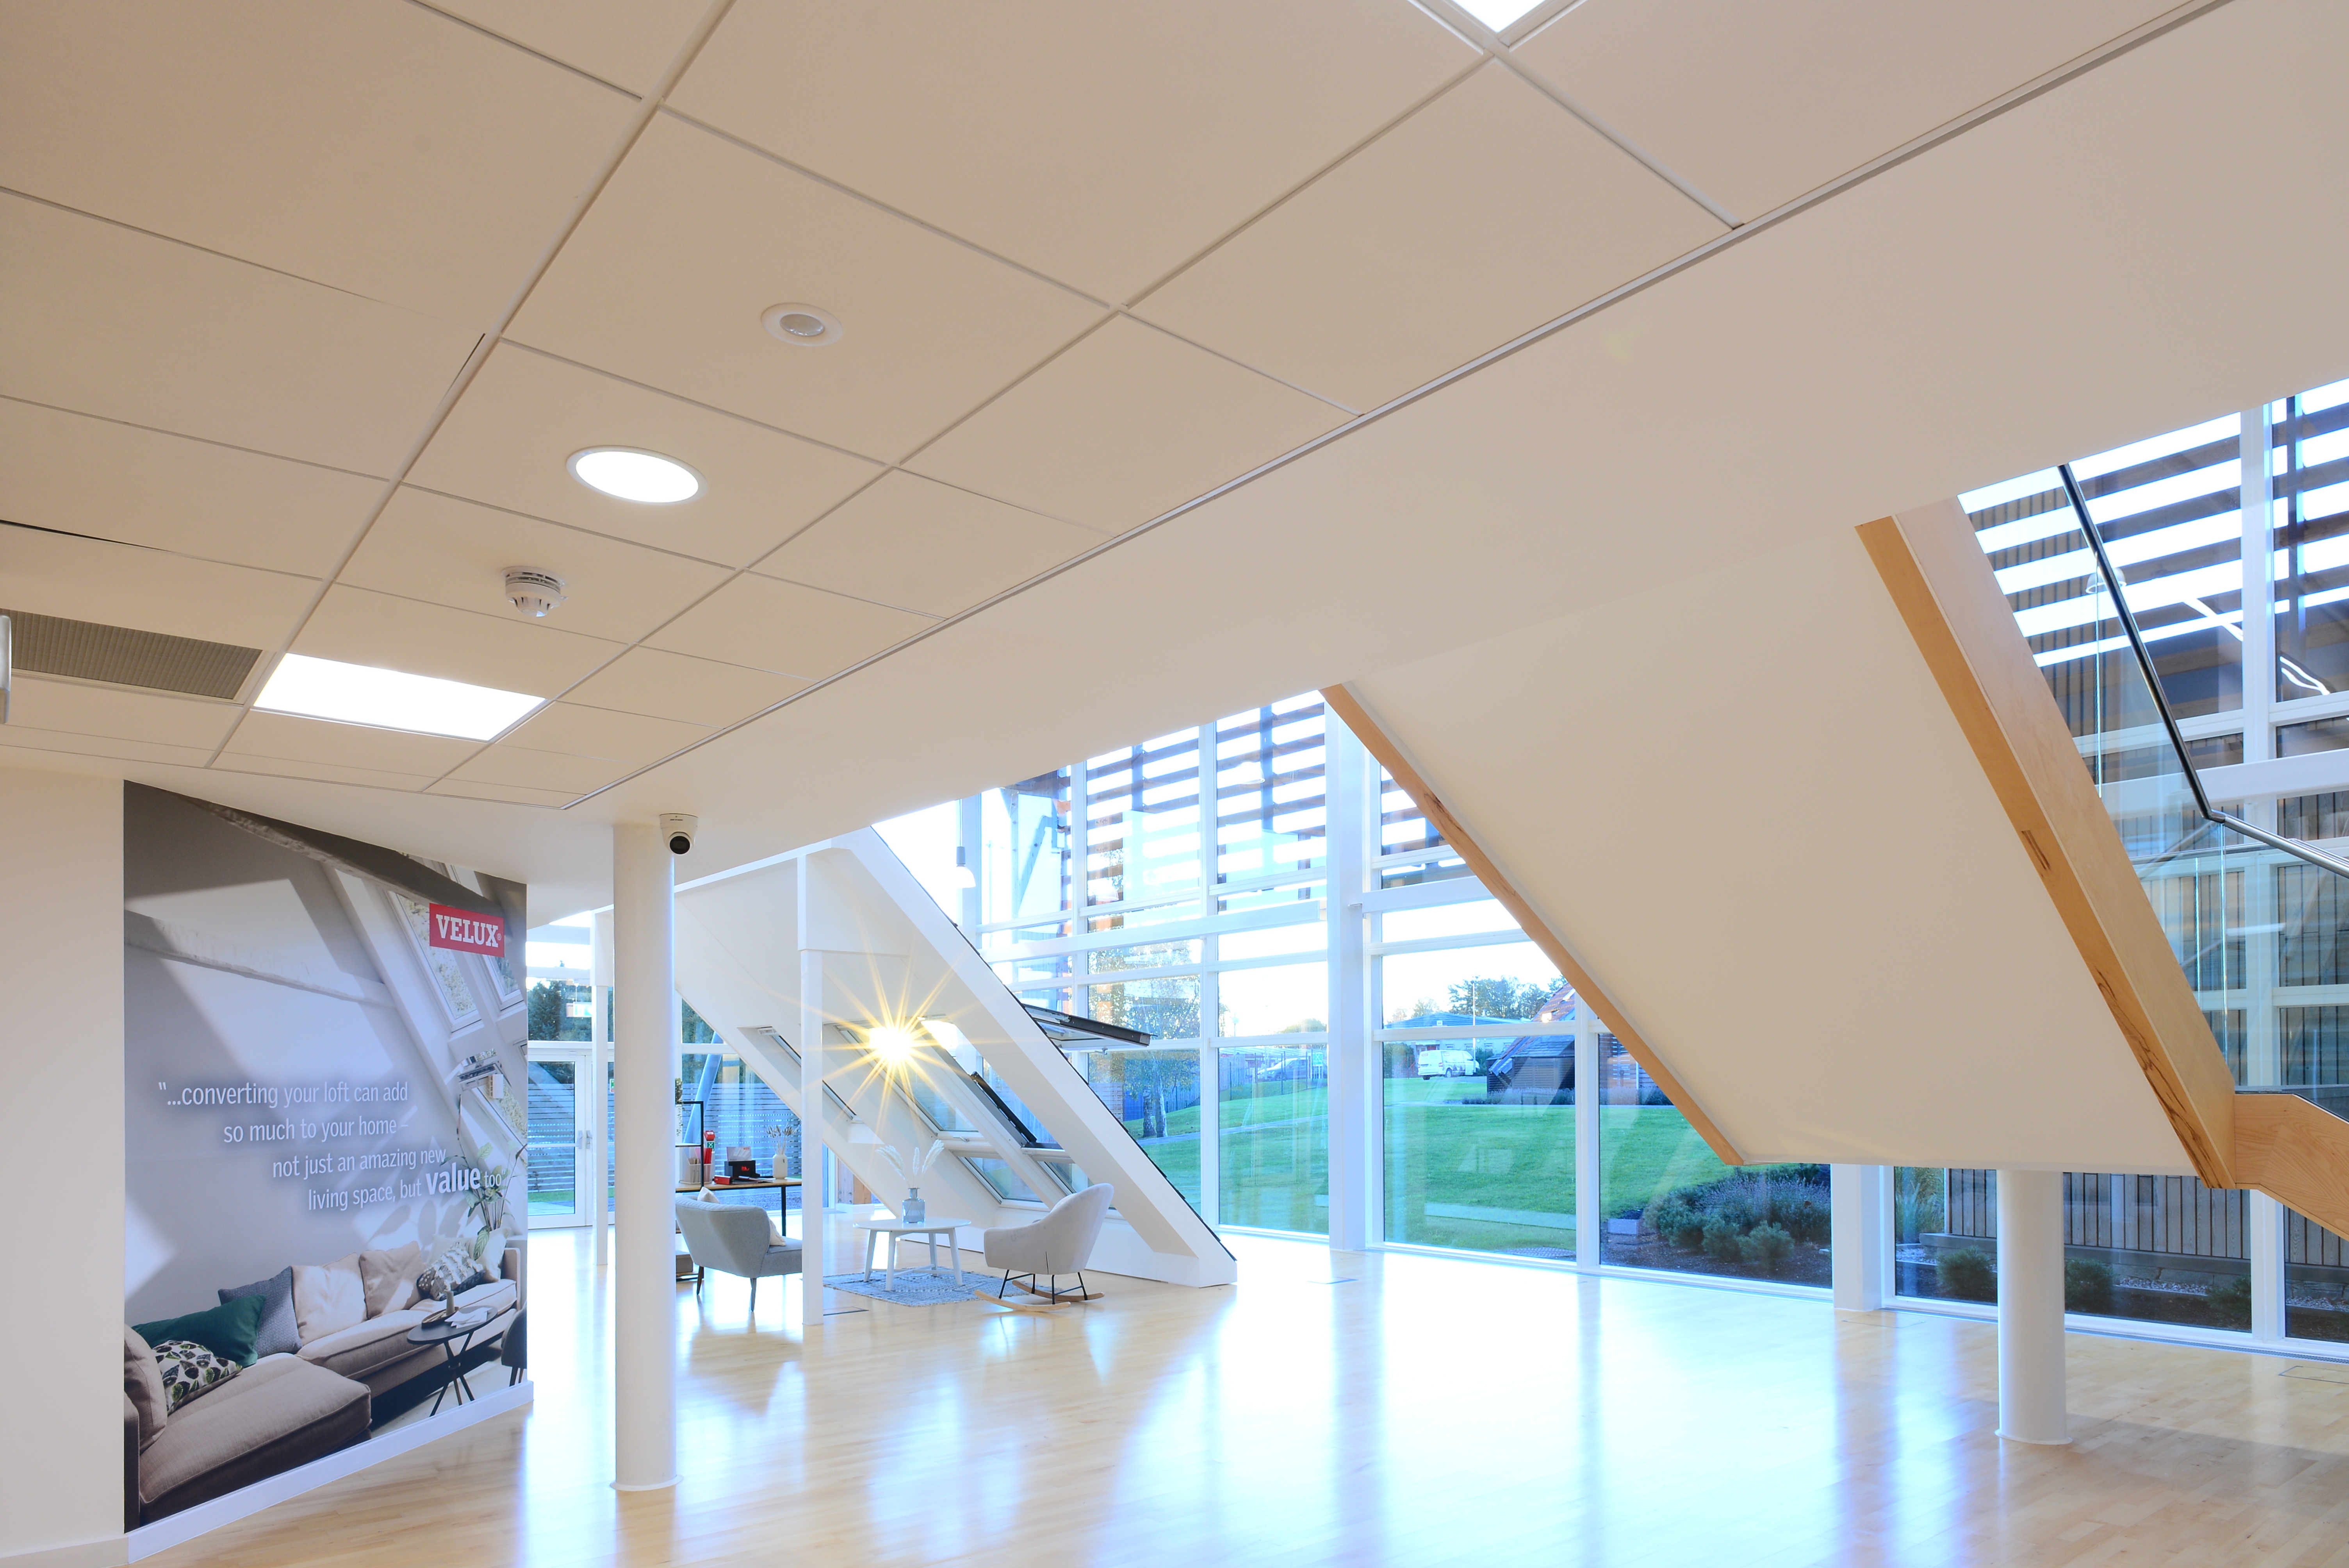 Zentia systems help VELUX® reach for the sky